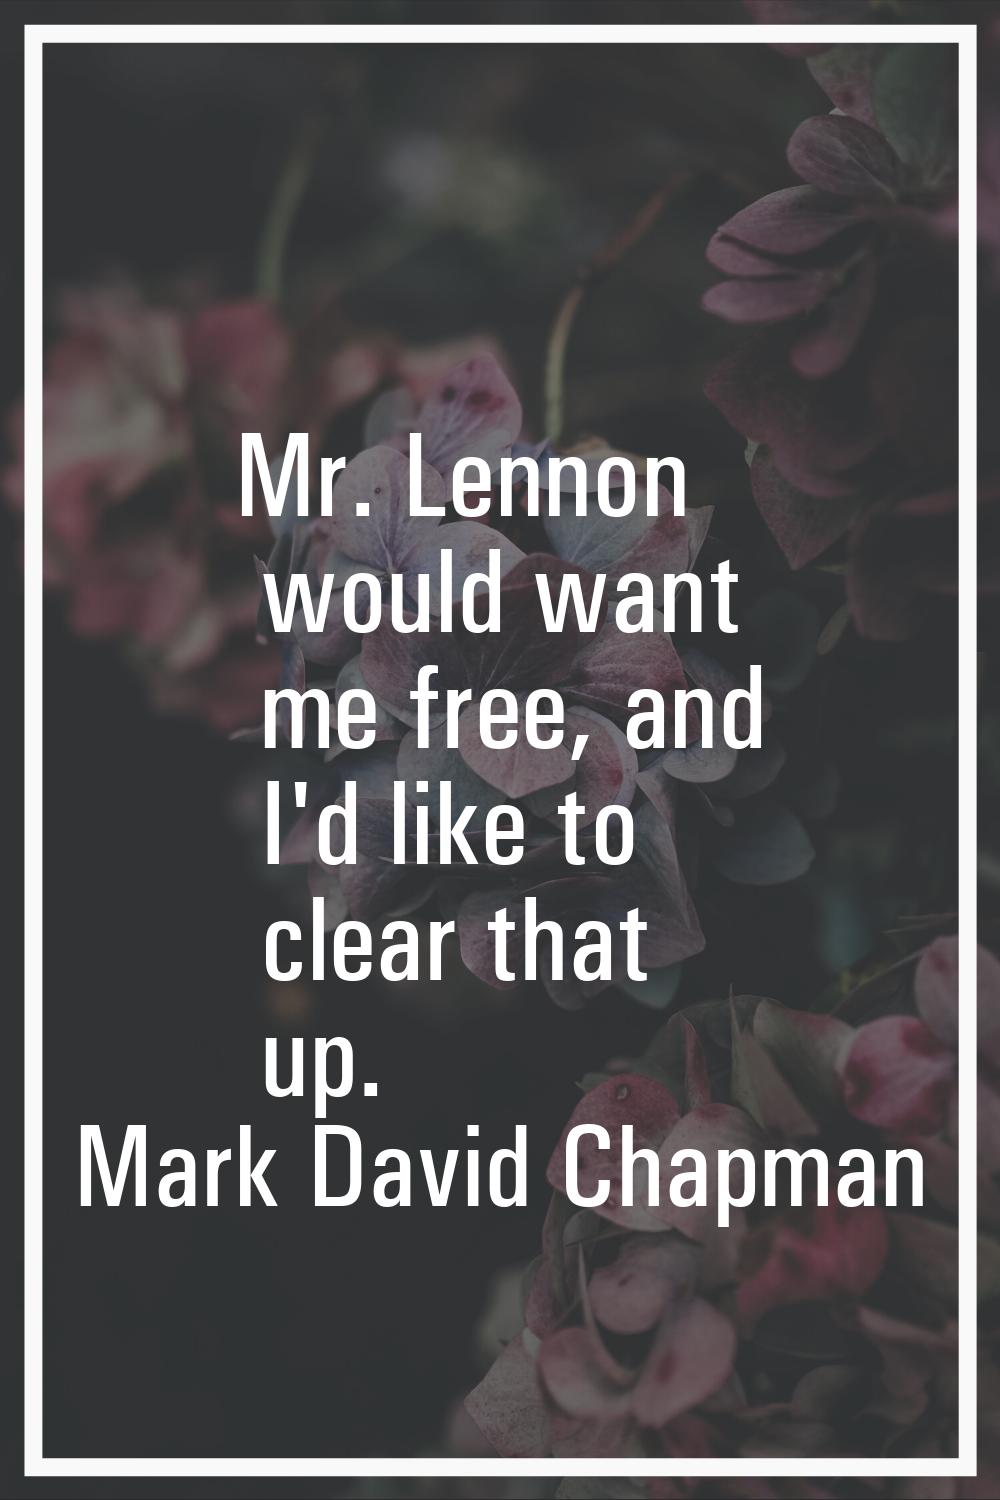 Mr. Lennon would want me free, and I'd like to clear that up.